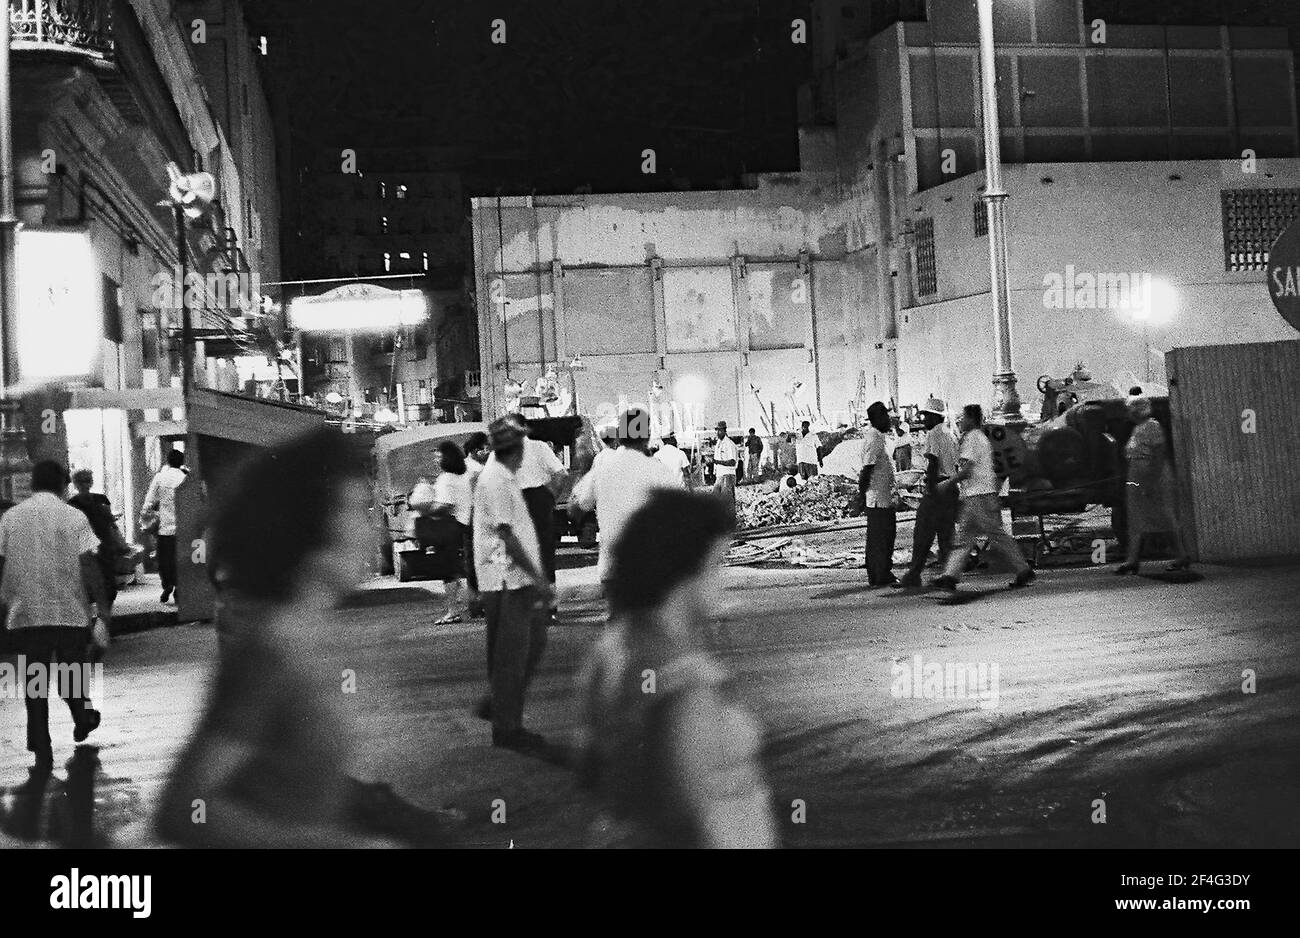 Angled night-shot of people walking in a well-lit urban area, with a rubble-filled lot in the background, Havana, Cuba, 1964. From the Deena Stryker photographs collection. () Stock Photo